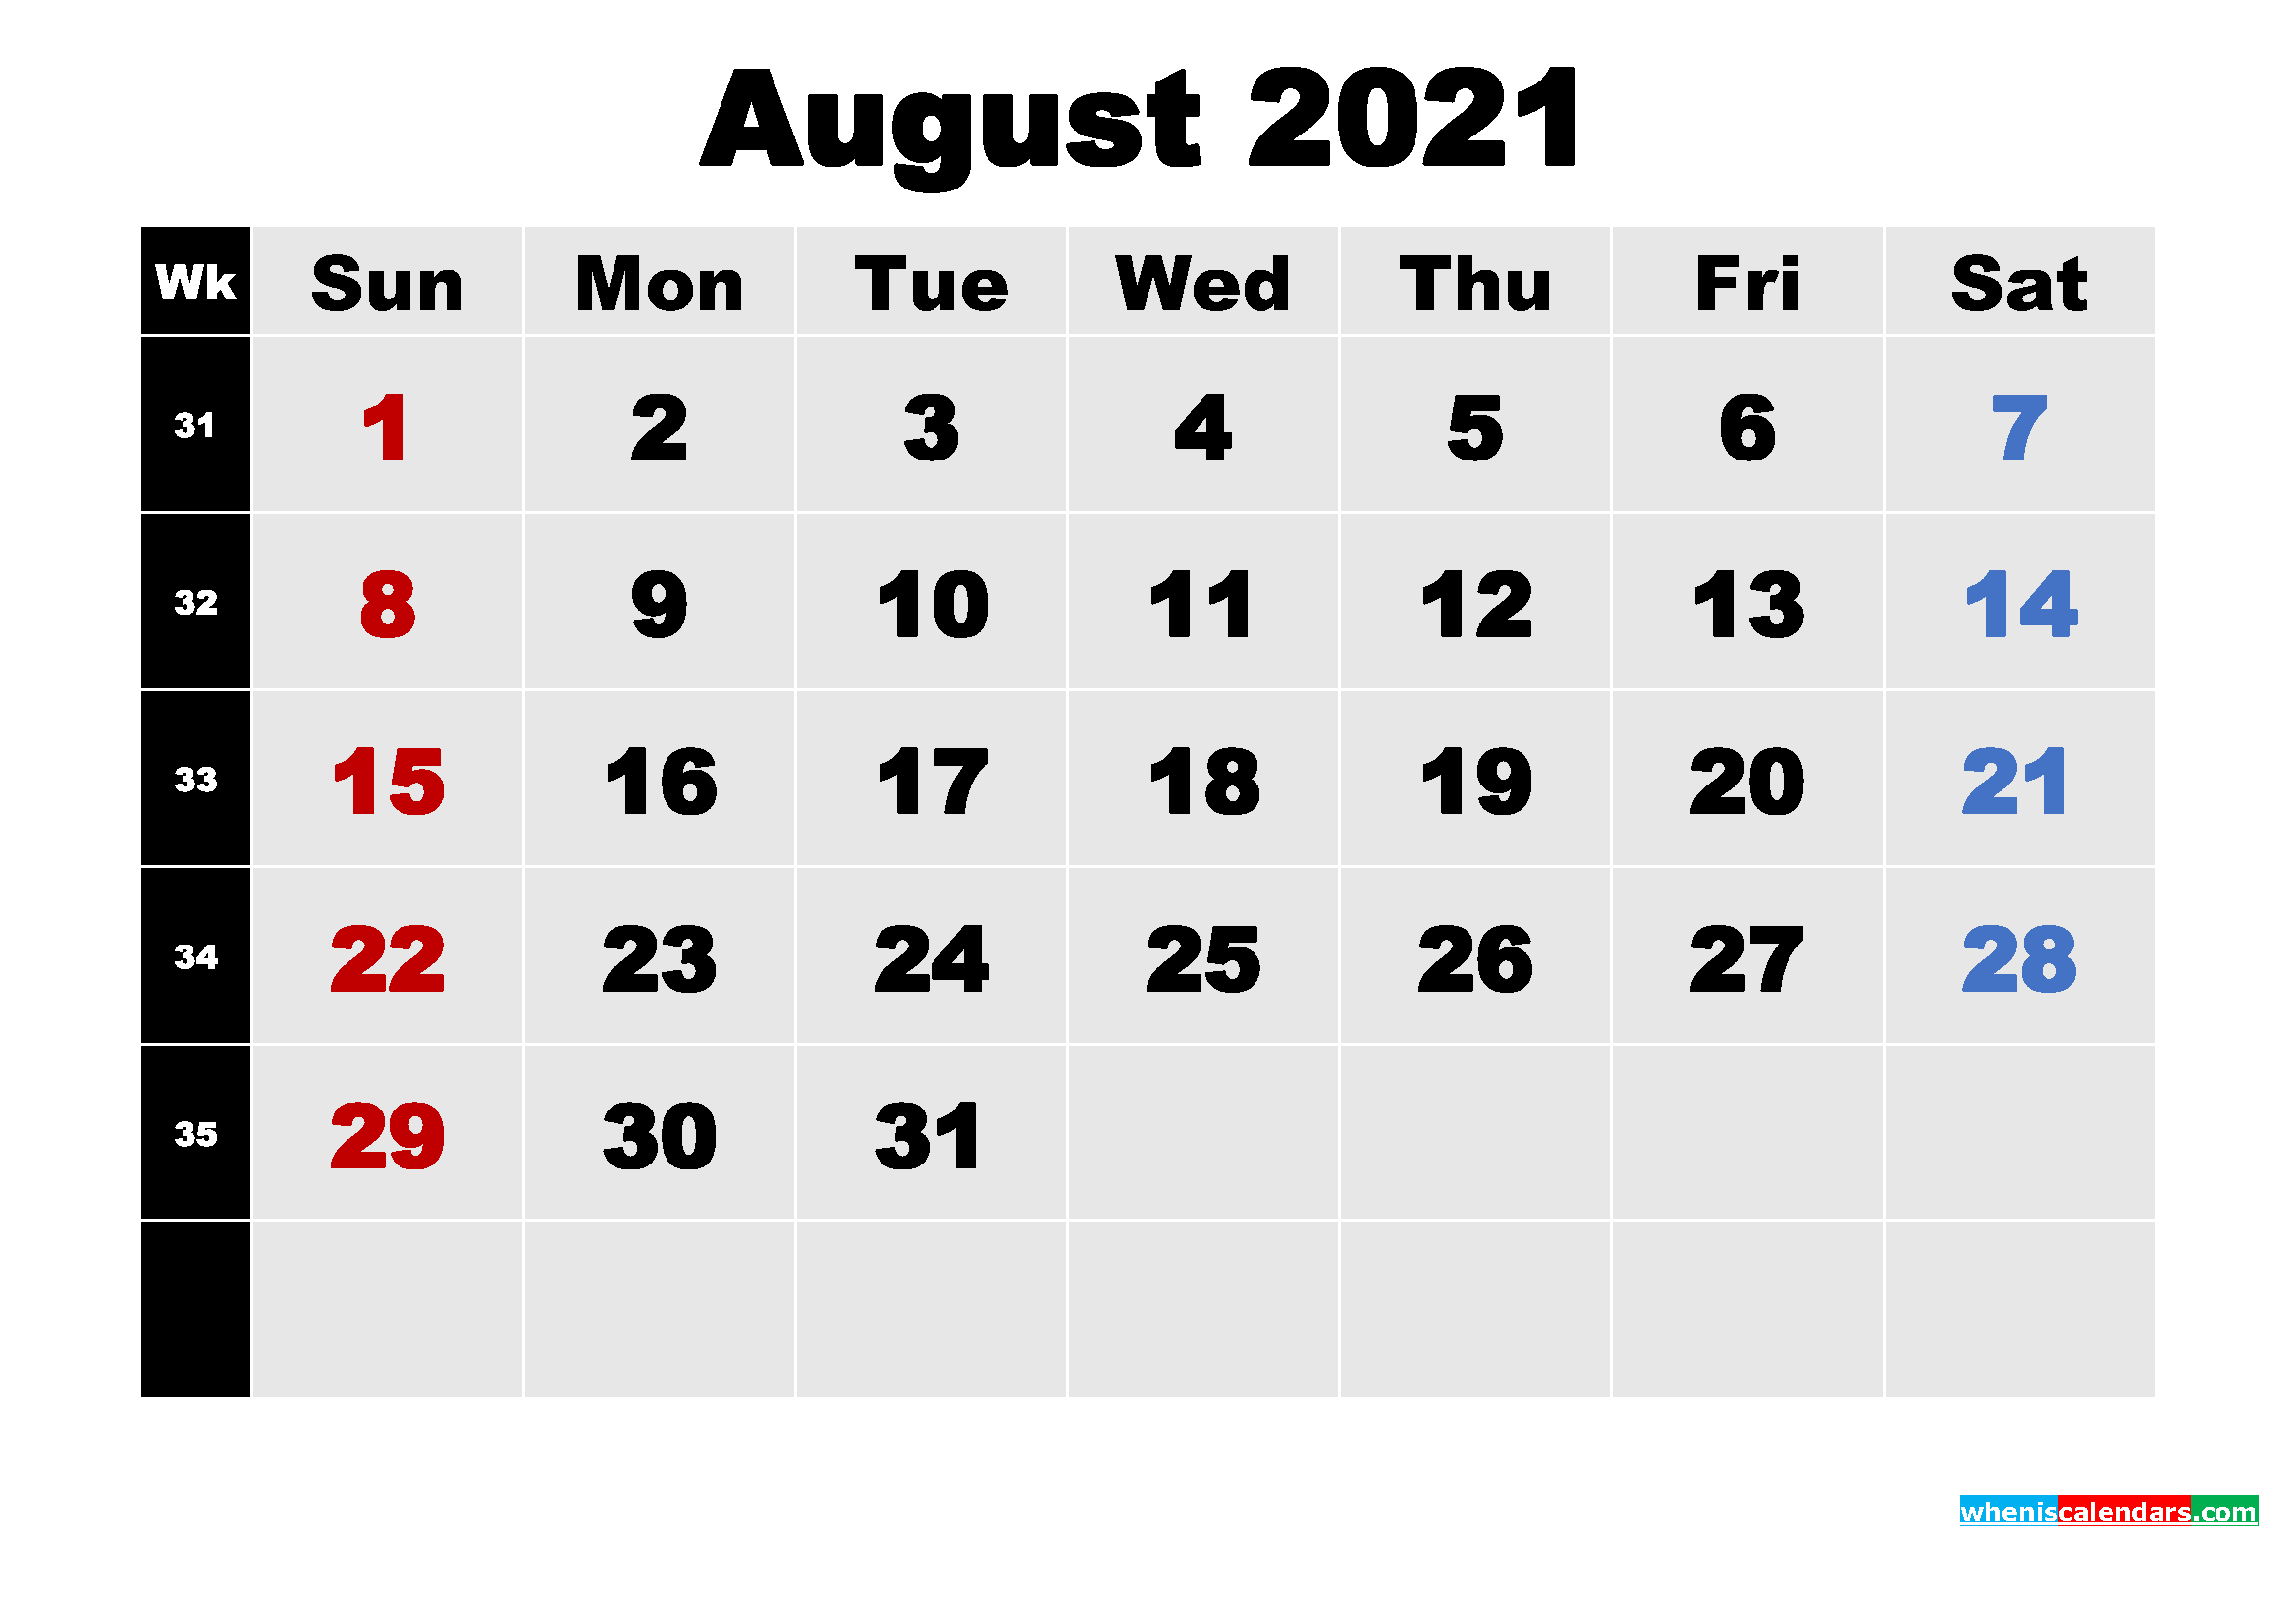 august 2021 desktop calendar August 2021 Desktop Calendar High Resolution Free Printable 2020 Monthly Calendar With Holidays august 2021 desktop calendar